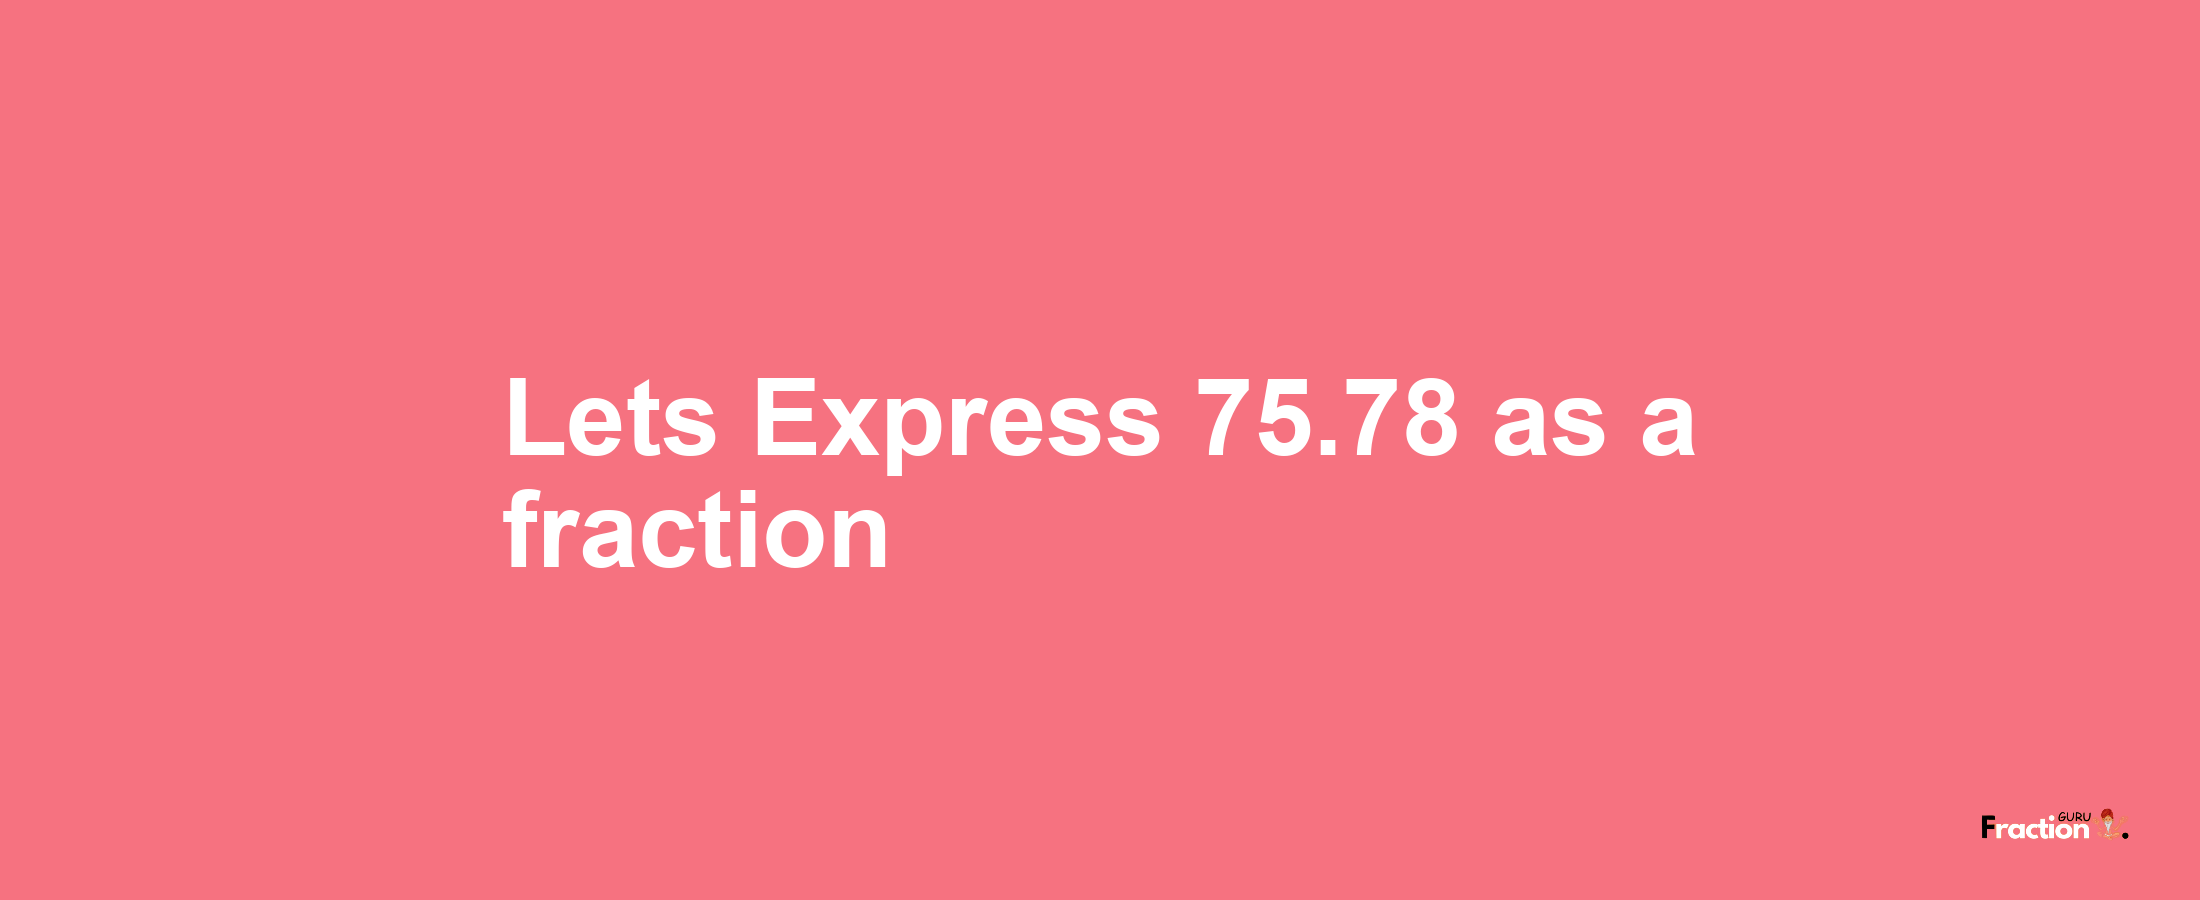 Lets Express 75.78 as afraction